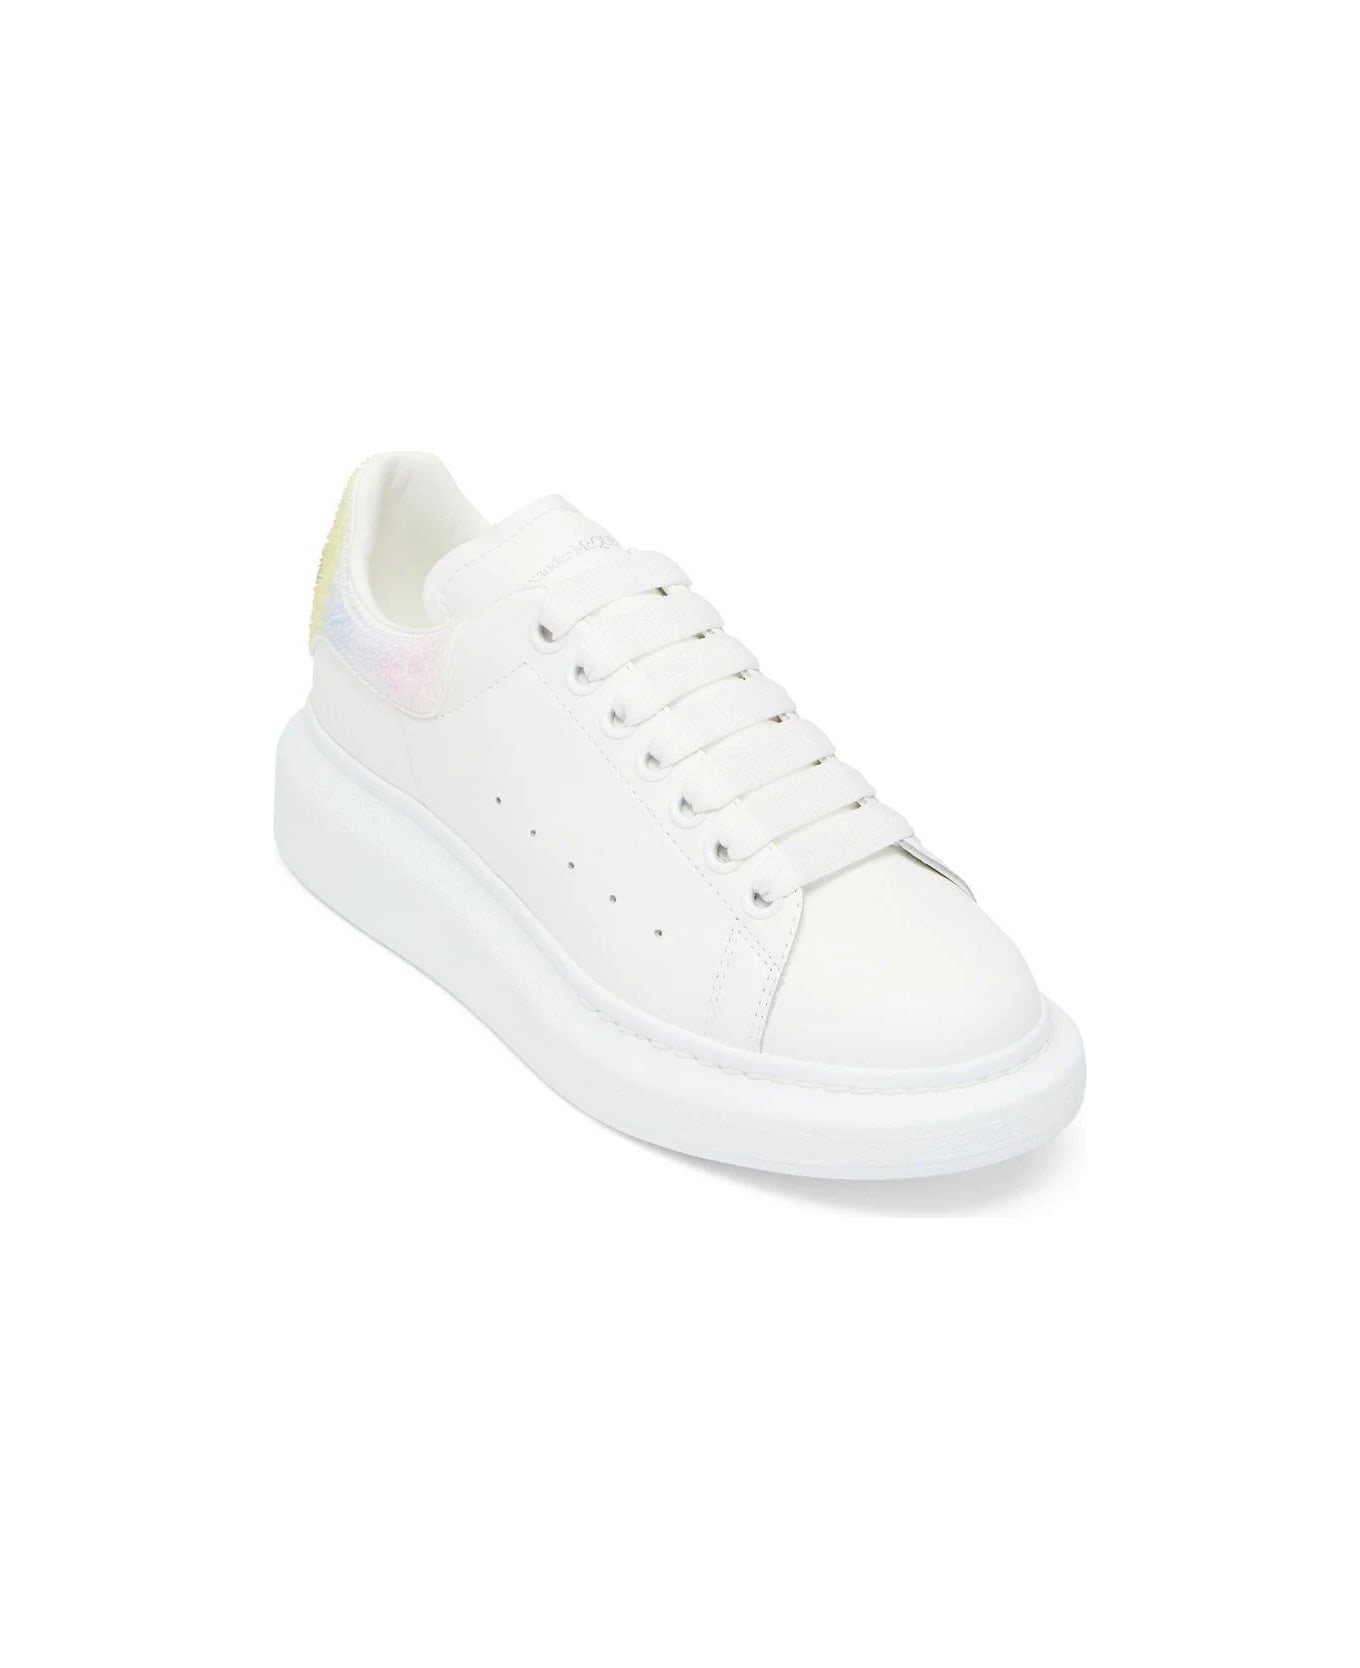 Alexander McQueen White Oversize Sneakers With Multicoloured Spoilers - Bianco